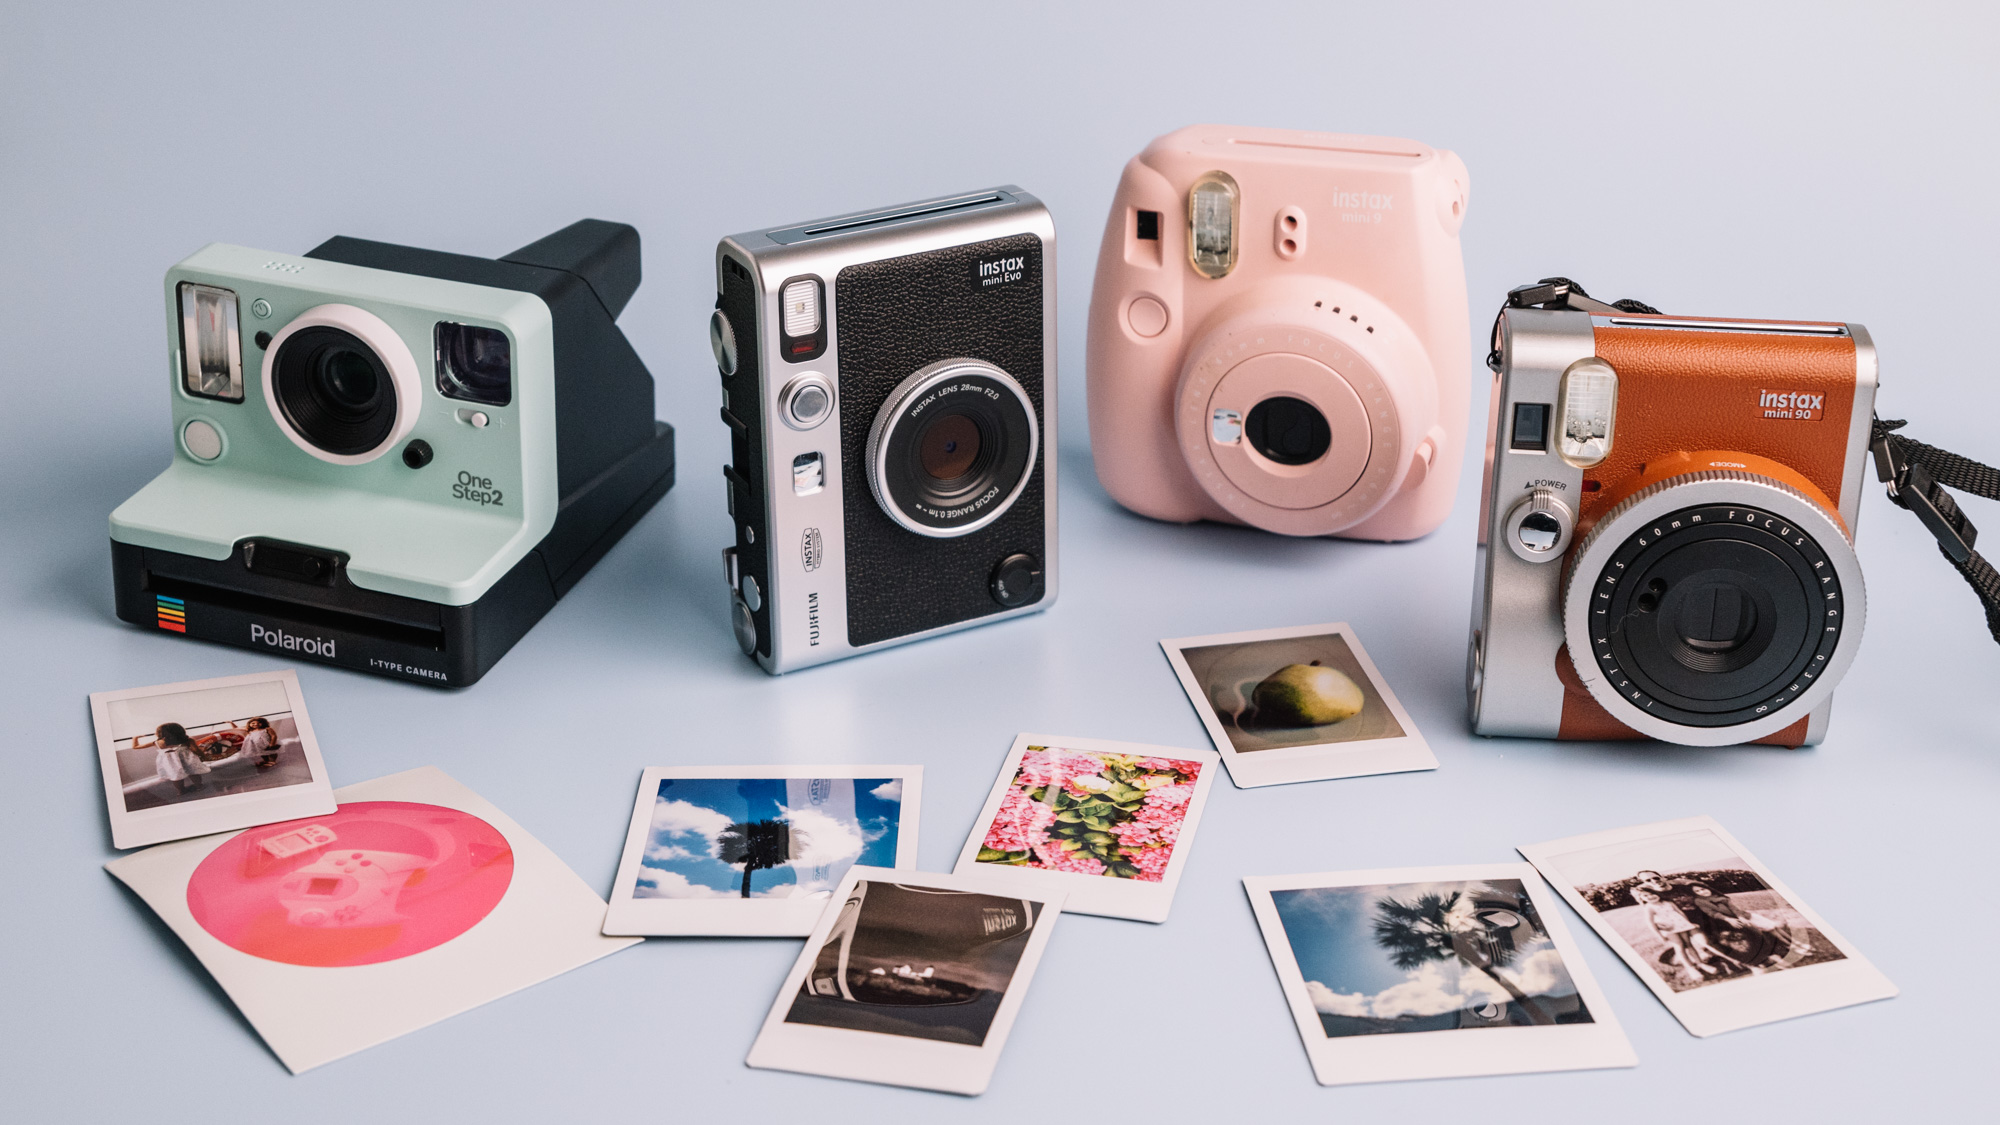 Snazzy Stof Gebeurt Fuji Instax and Polaroid Instant Camera Buyer's Guide! - Casual Photophile